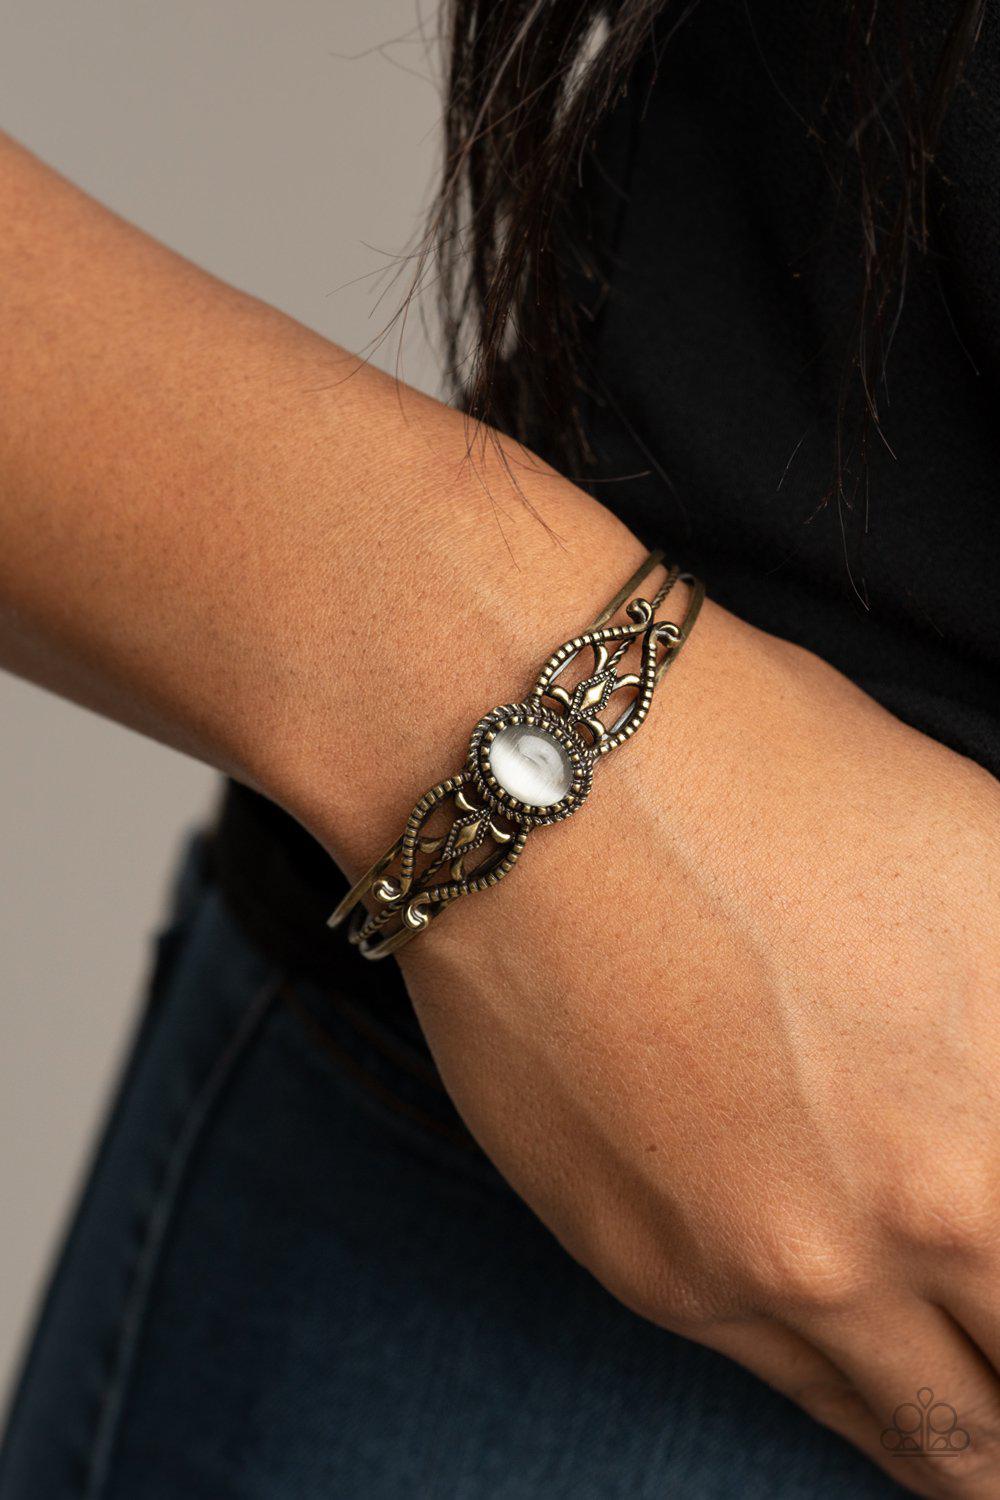 Wait and SEER Brass and Moonstone Bracelet - Paparazzi Accessories- model - CarasShop.com - $5 Jewelry by Cara Jewels